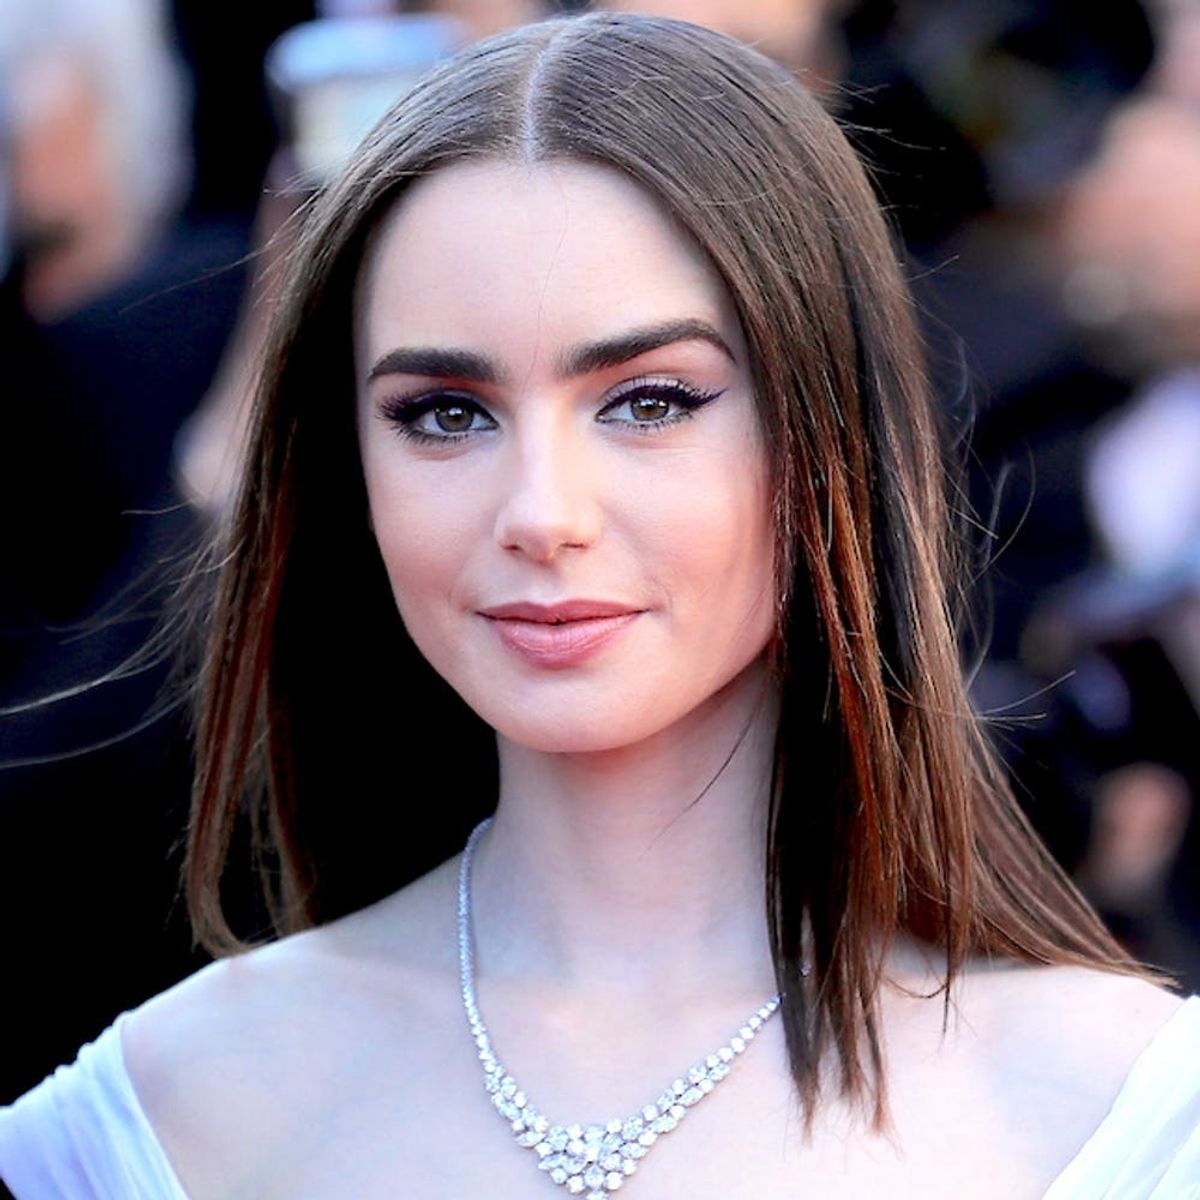 Lily Collins Rocked a Seriously Adorable New Hairdo at Cannes